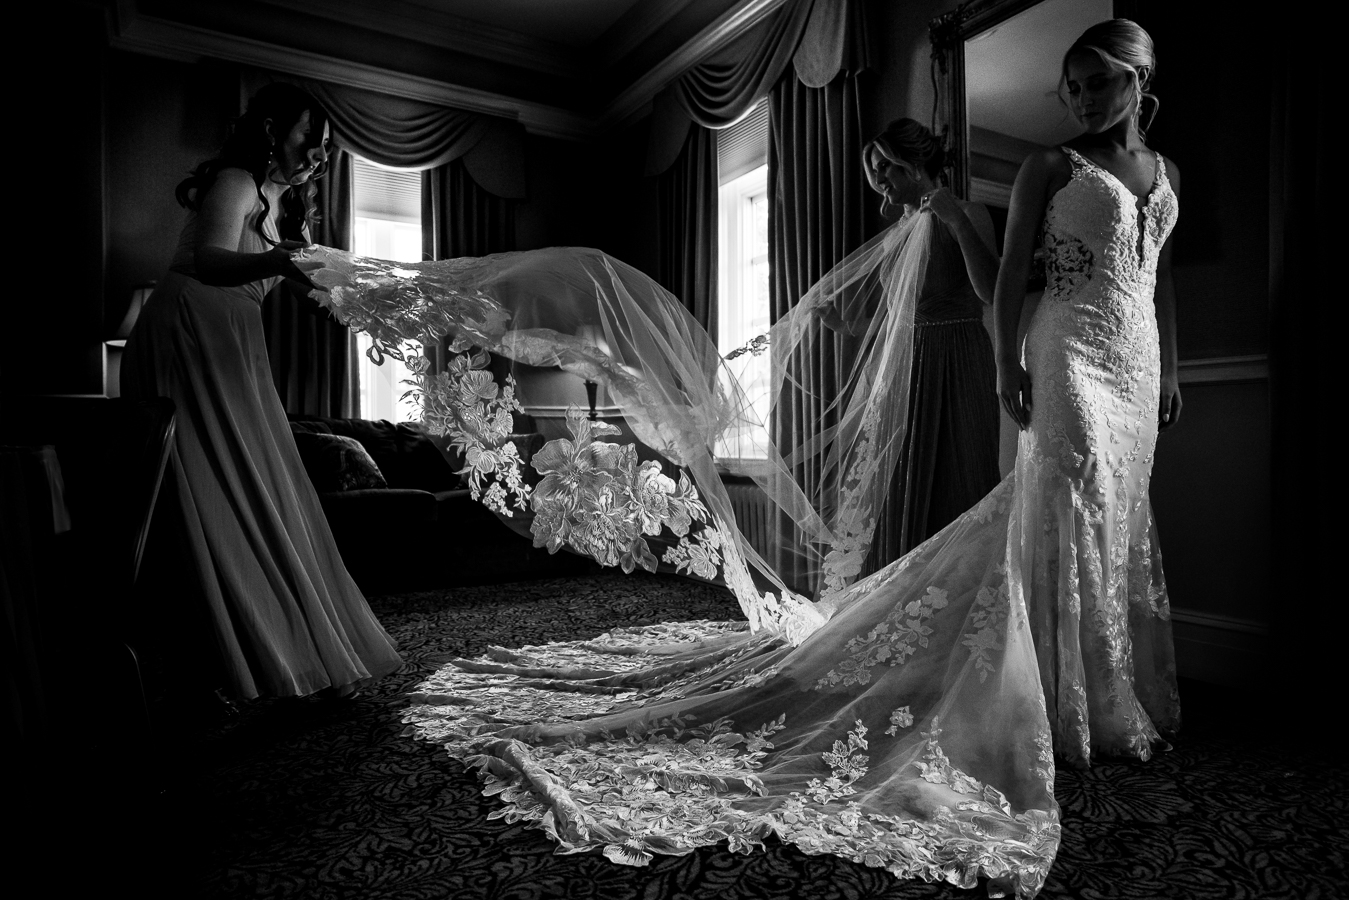 creative wedding photographer, lisa rhinehart, captures this black and white image of the bride standing in her wedding dress as her bridesmaids lay out her train for her